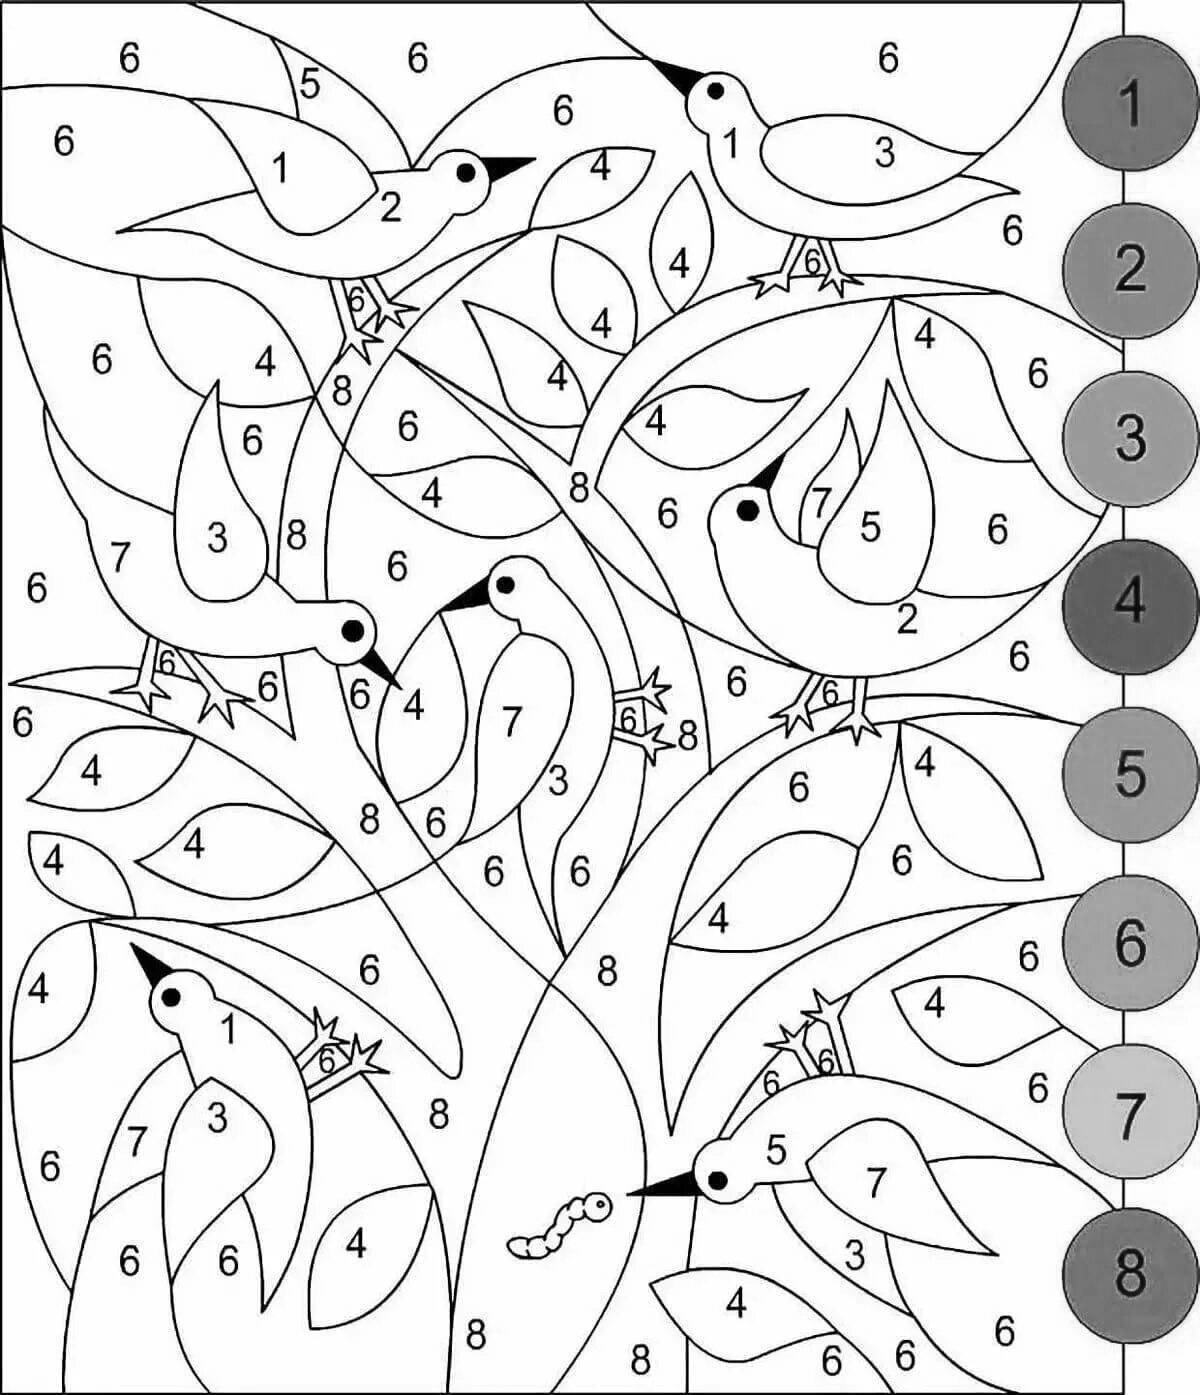 Magic coloring game by cells and numbers